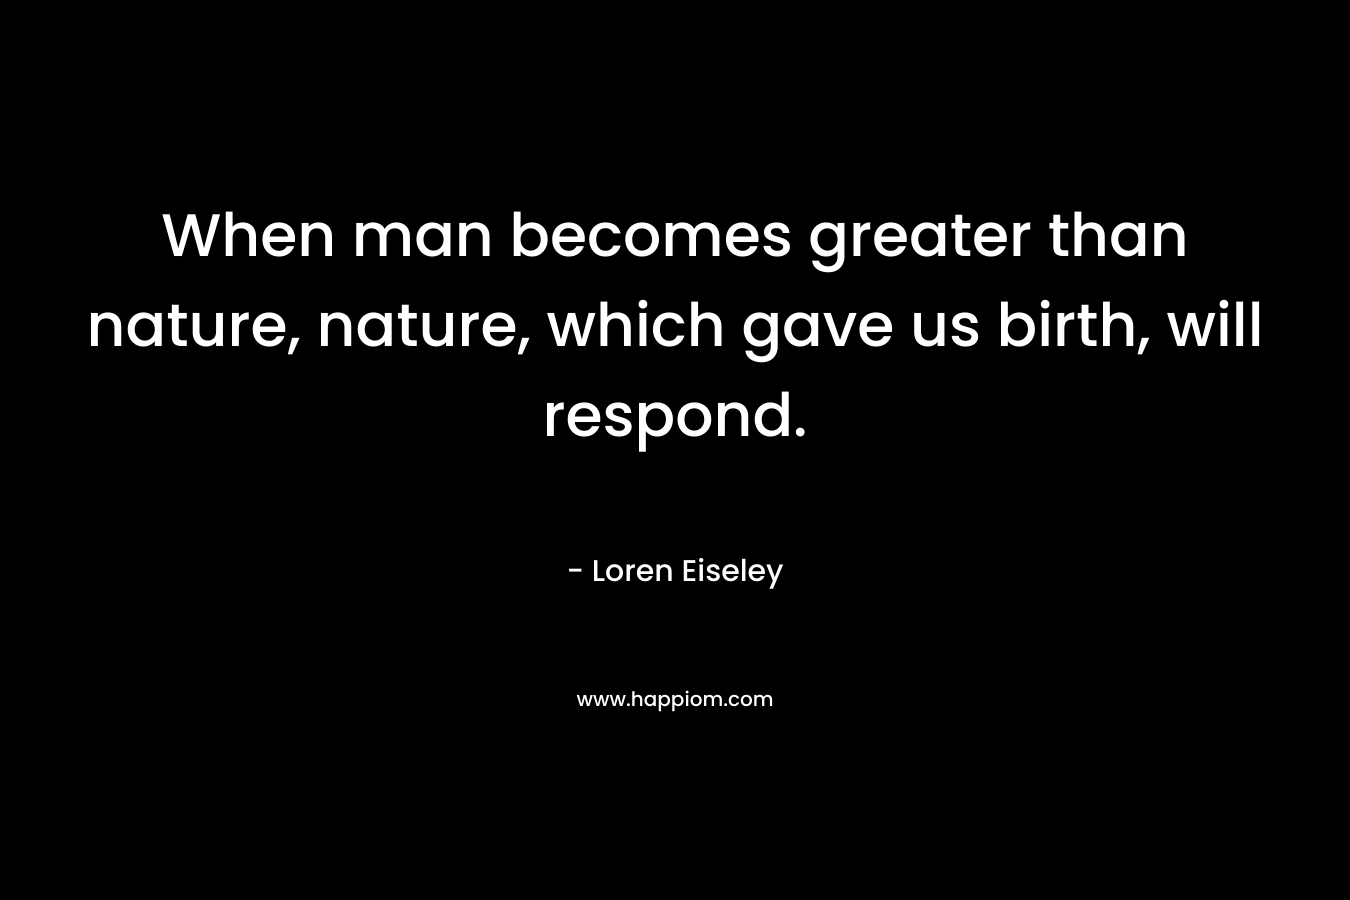 When man becomes greater than nature, nature, which gave us birth, will respond. – Loren Eiseley